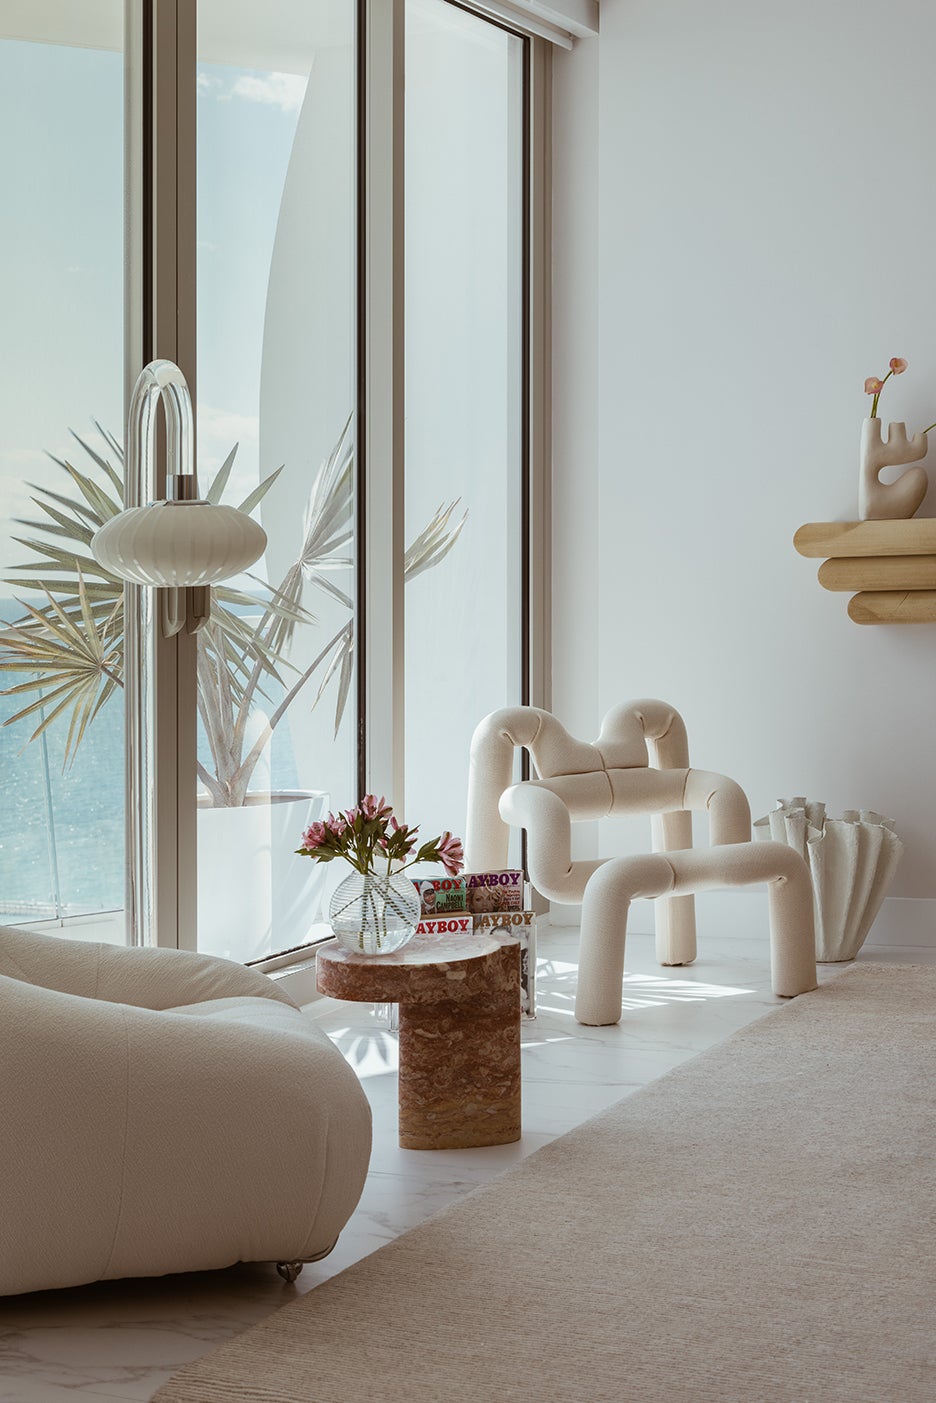 sculptural white furniture in front of sliding doors to balcony